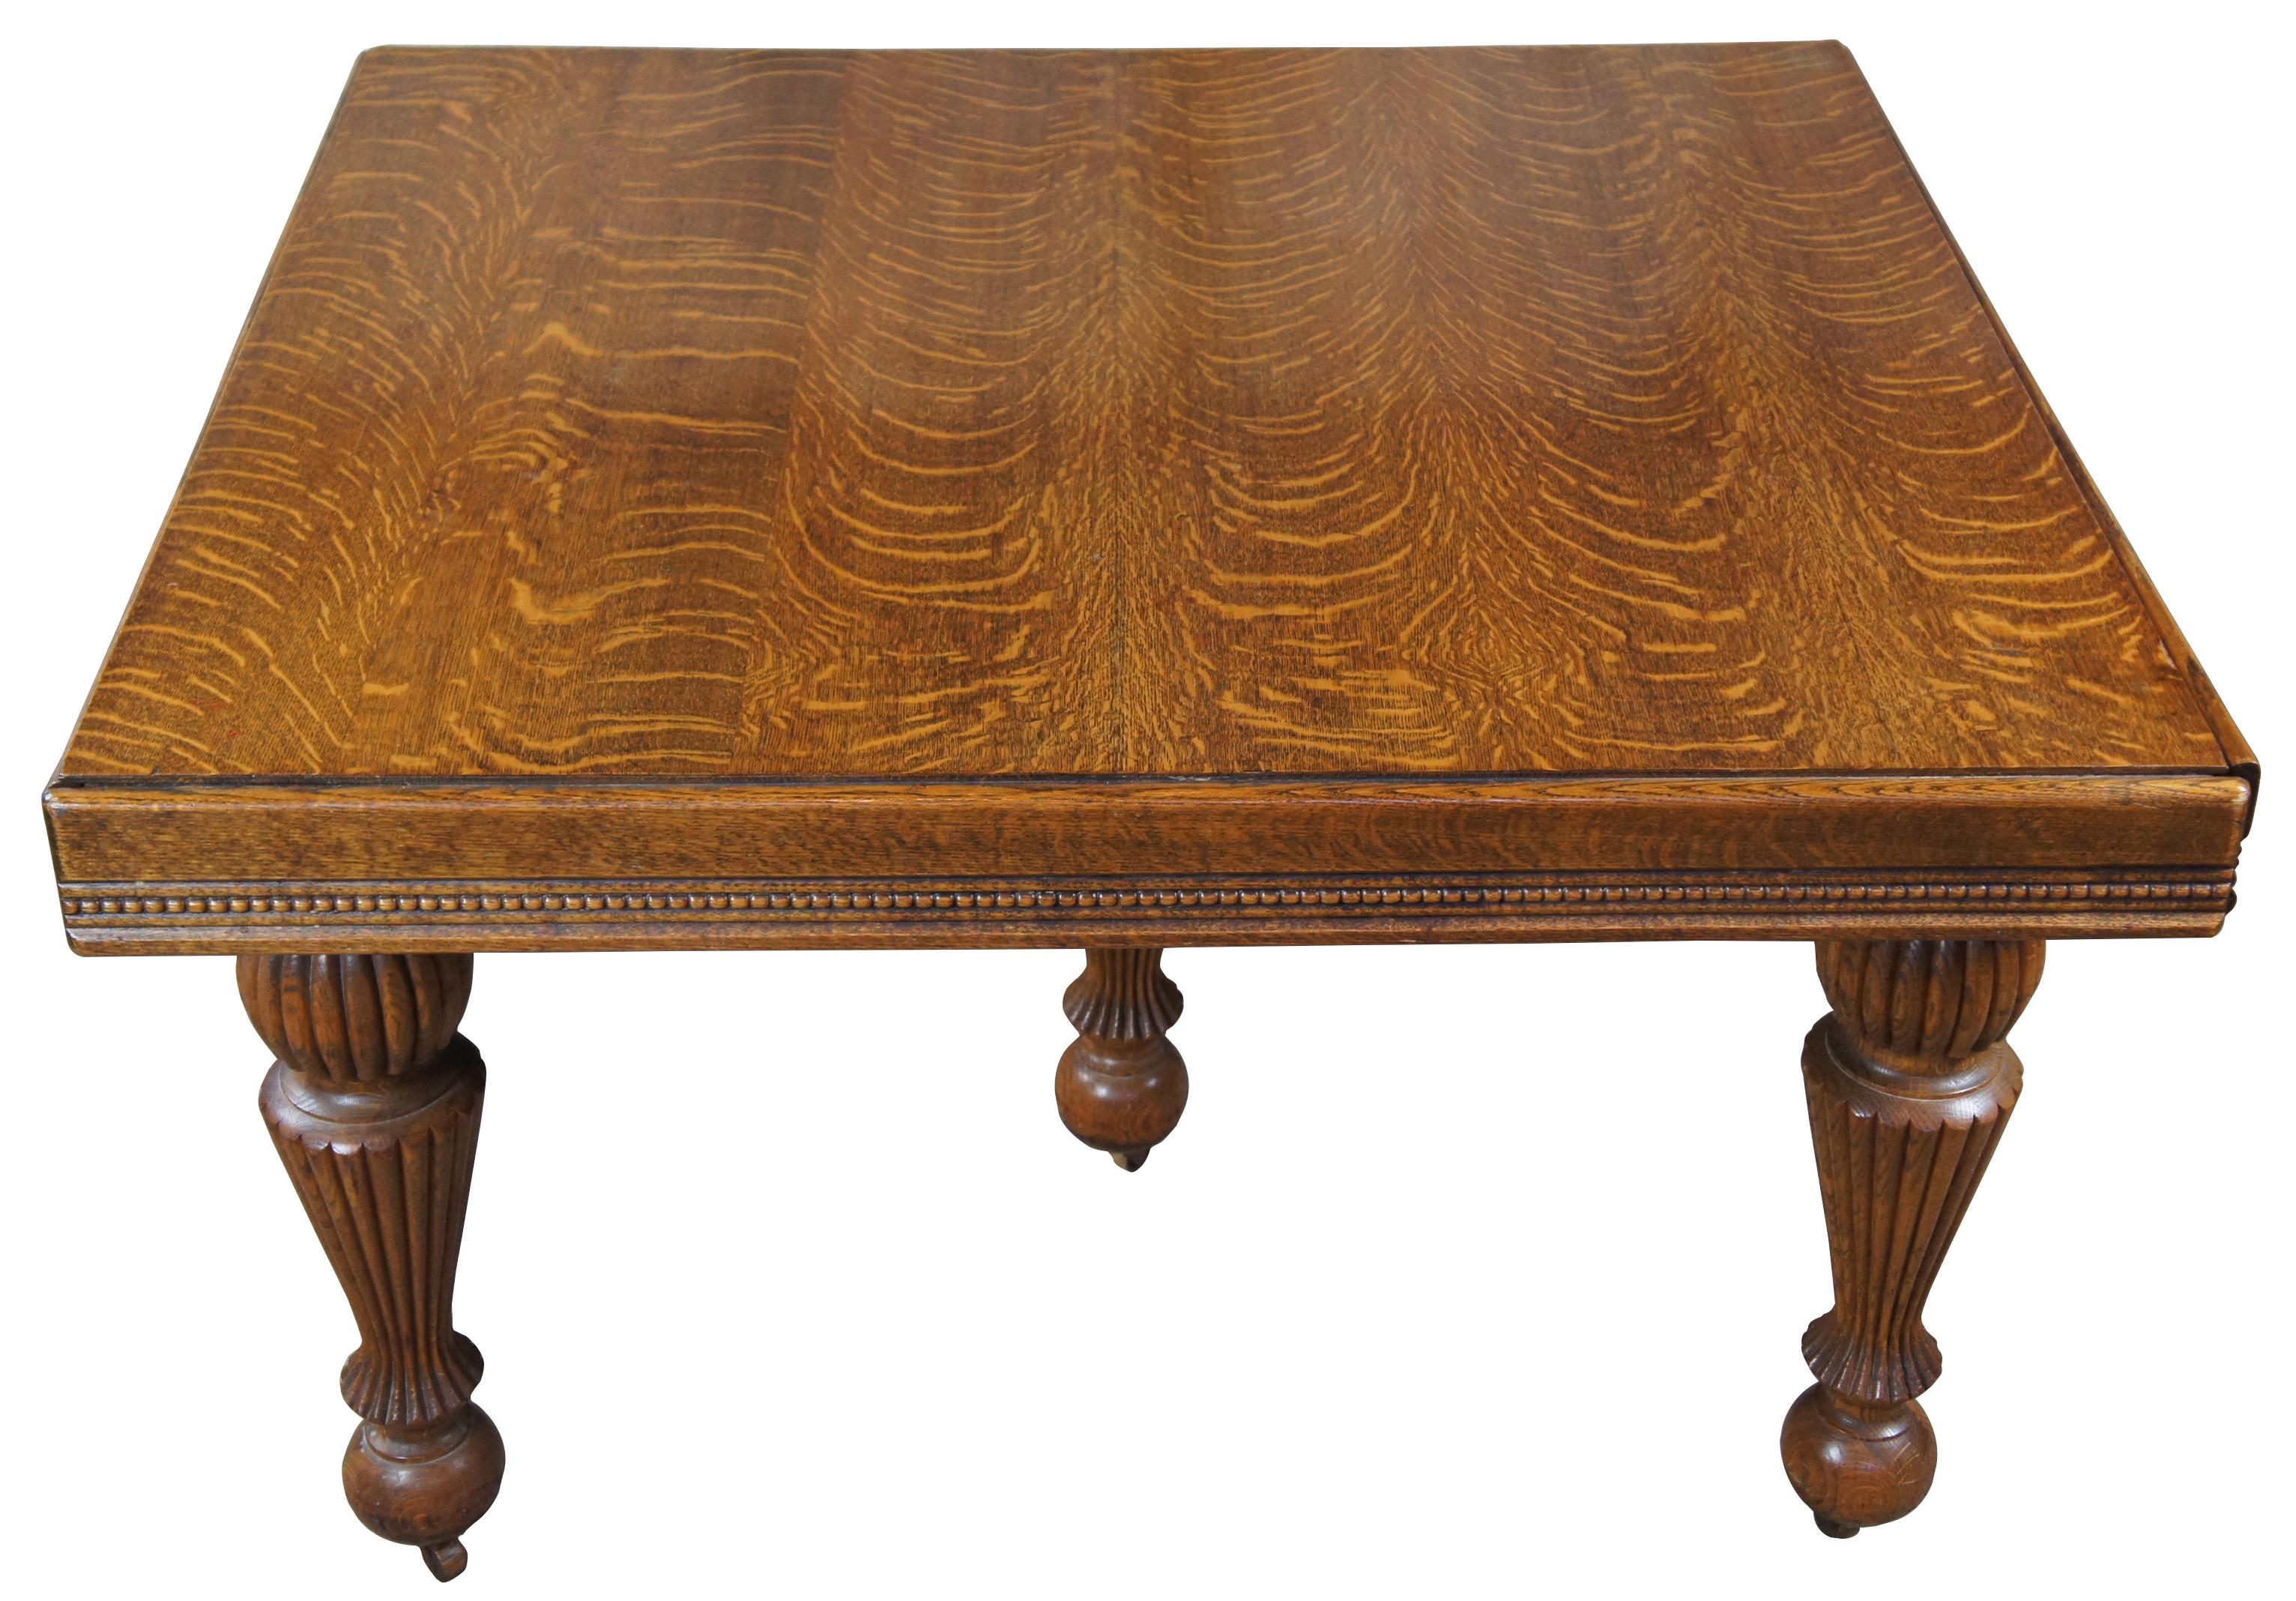 Turn of the 20th century quartersawn tiger oak dining table. Measures: 93